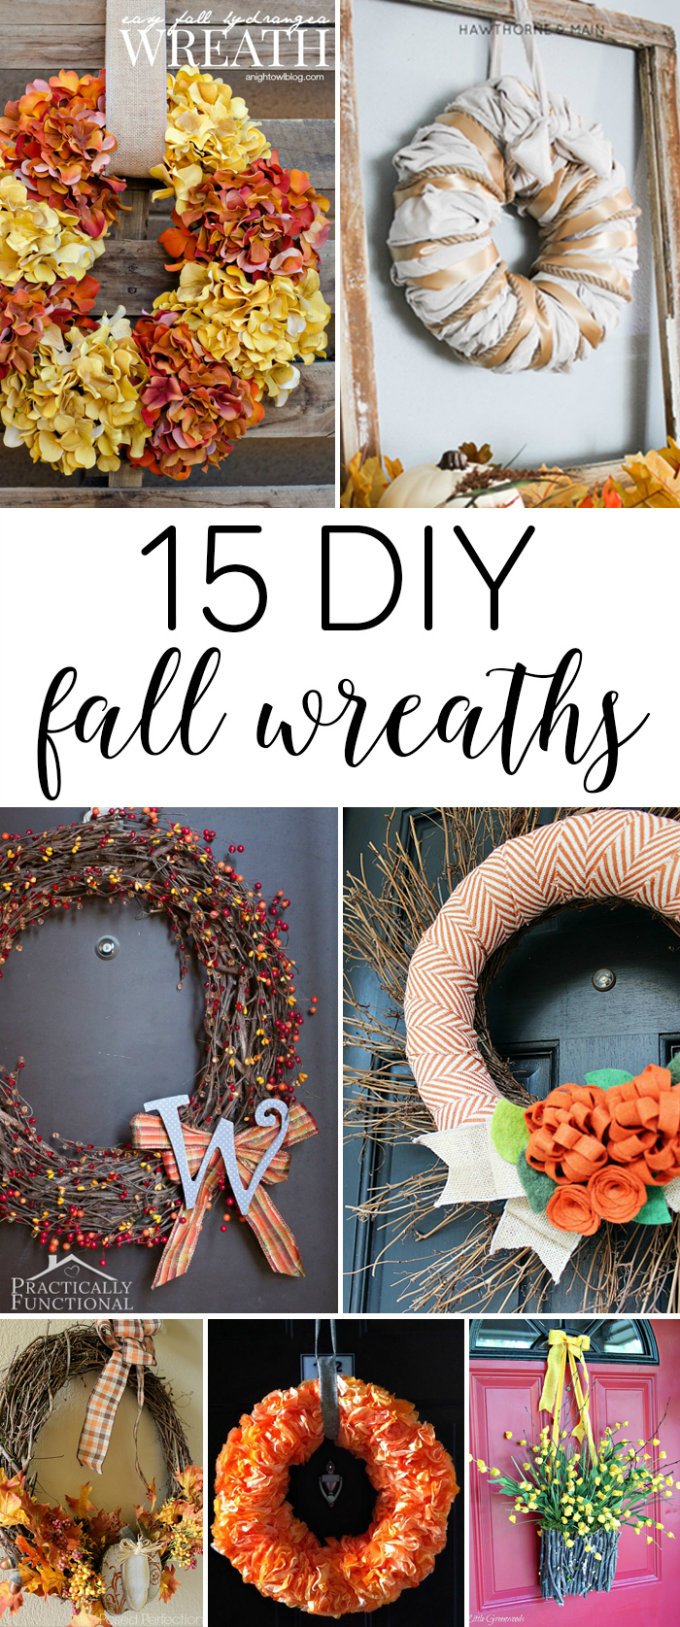 15 DIY Fall Wreaths. A round-up of 15 DIY fall wreath ideas that will inspire you to welcome the fall season.